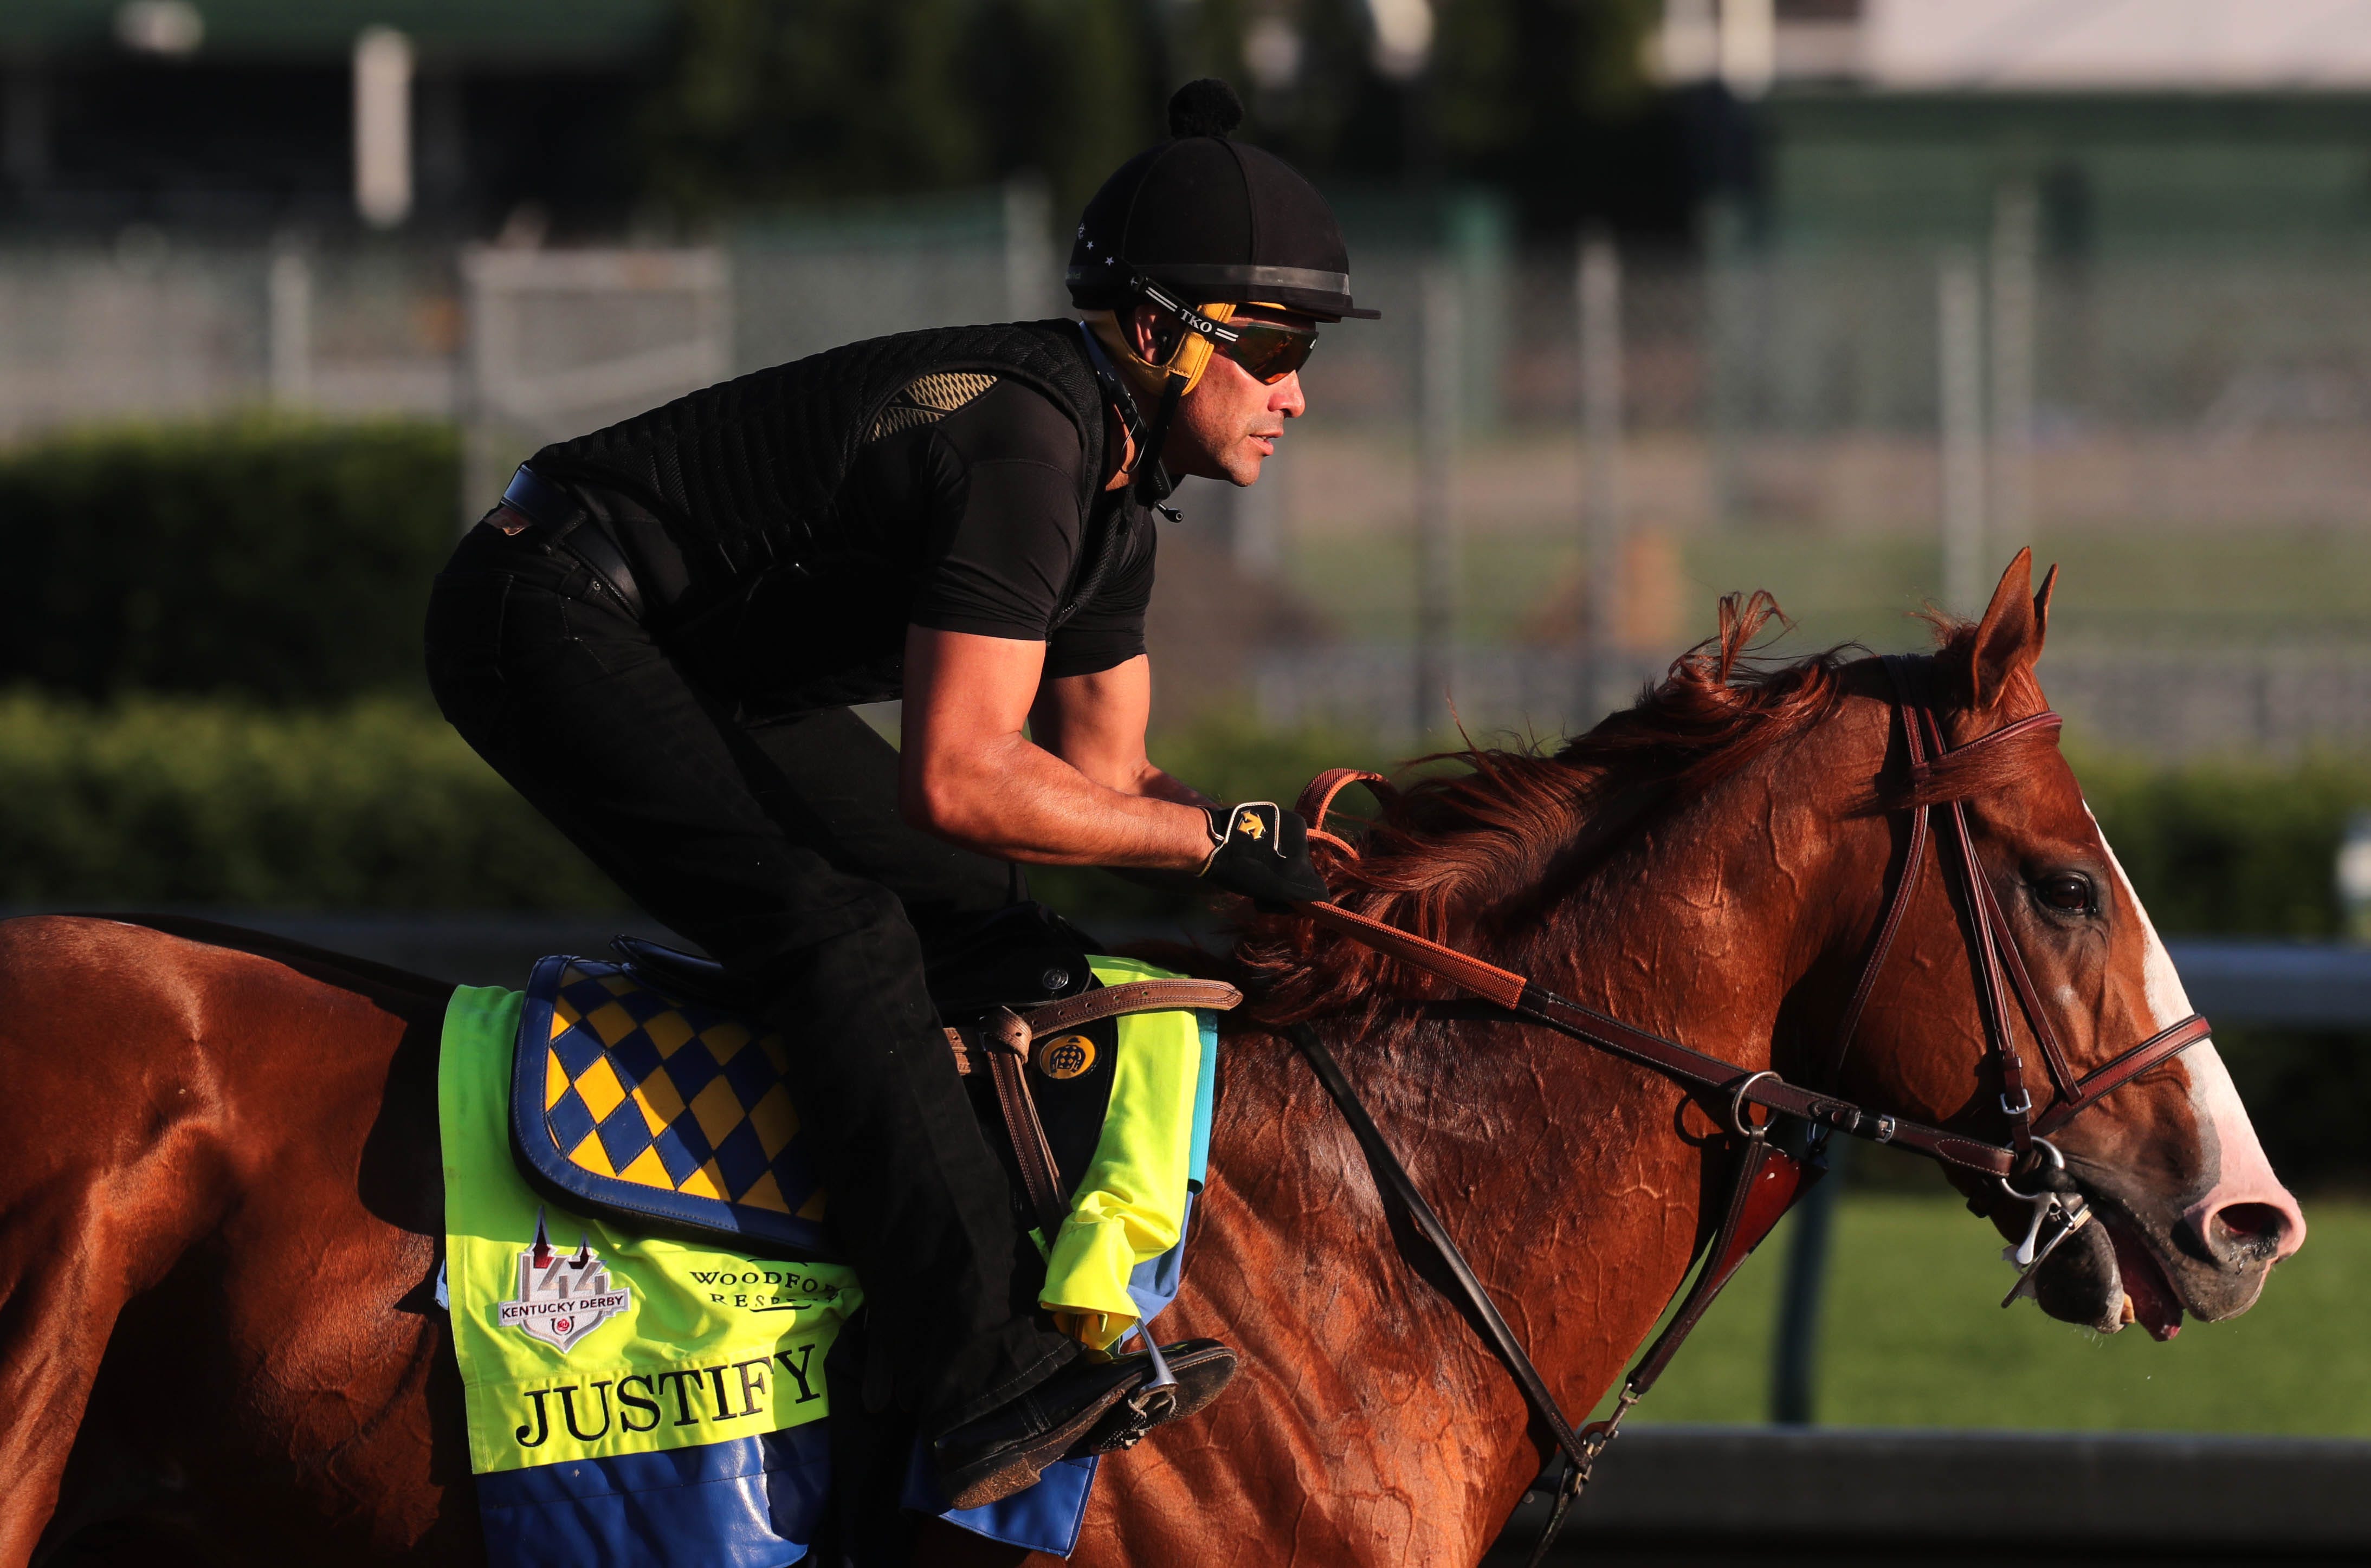 Exercise rider Humberto Gomez takes Justify out for a light gallop at Churchill Downs in Louisville, Ky.